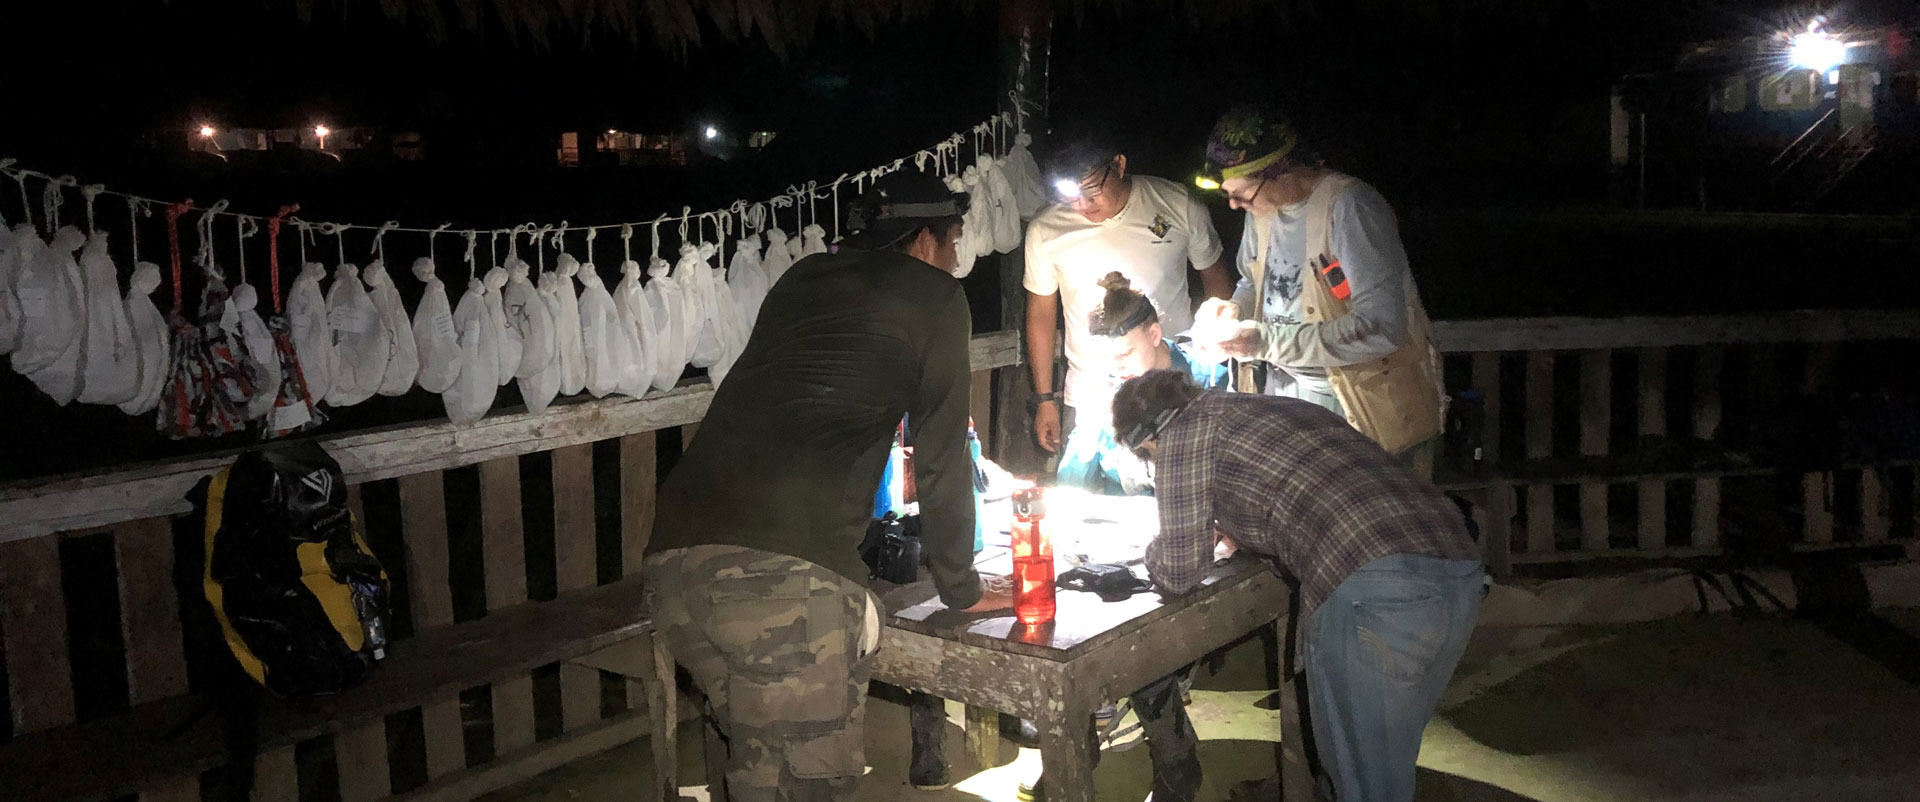 Researchers studying bats in a lodge in Chino Village